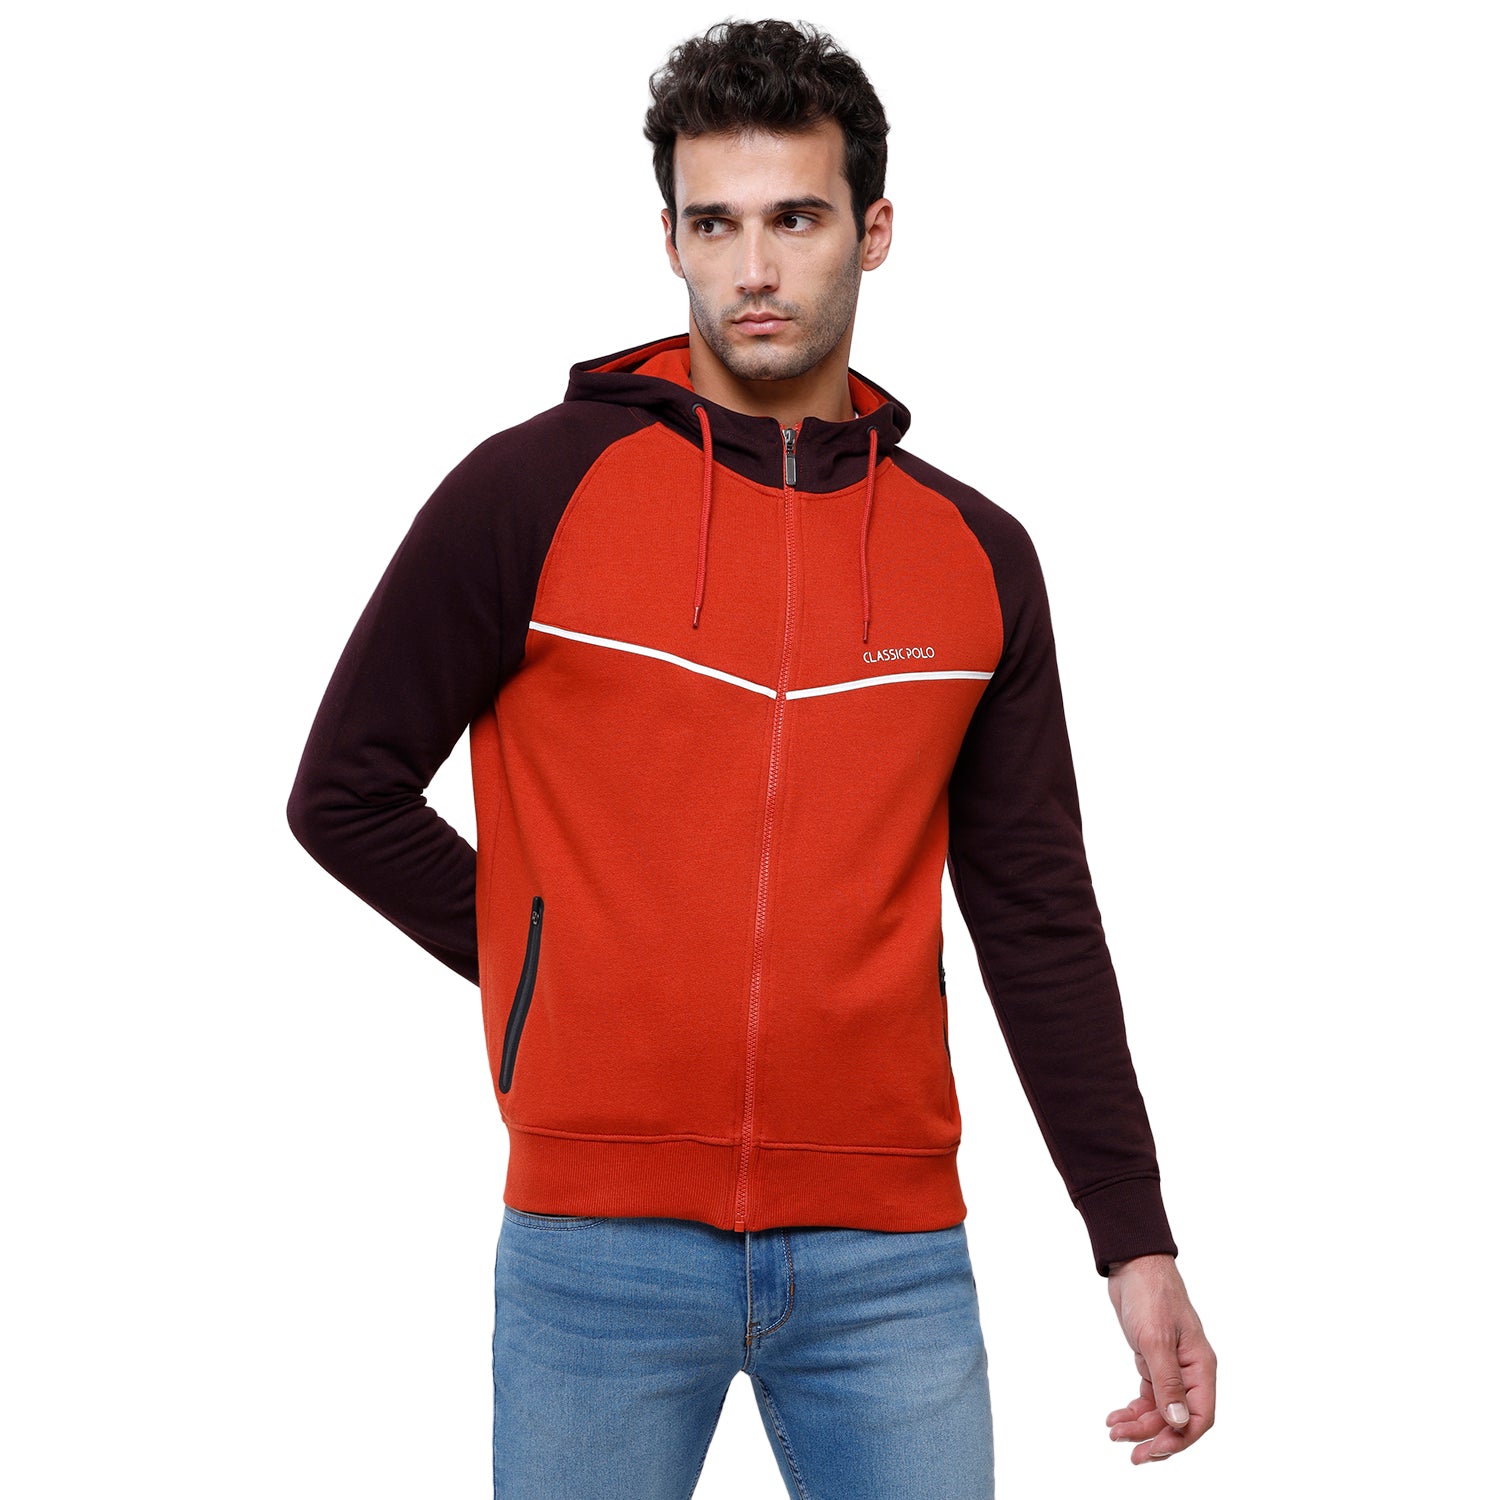 Classic Polo Men's Color Block Full Sleeve Red & Black Hooded Sweat Shirt - CPSS-331B Sweat Shirts Classic Polo 